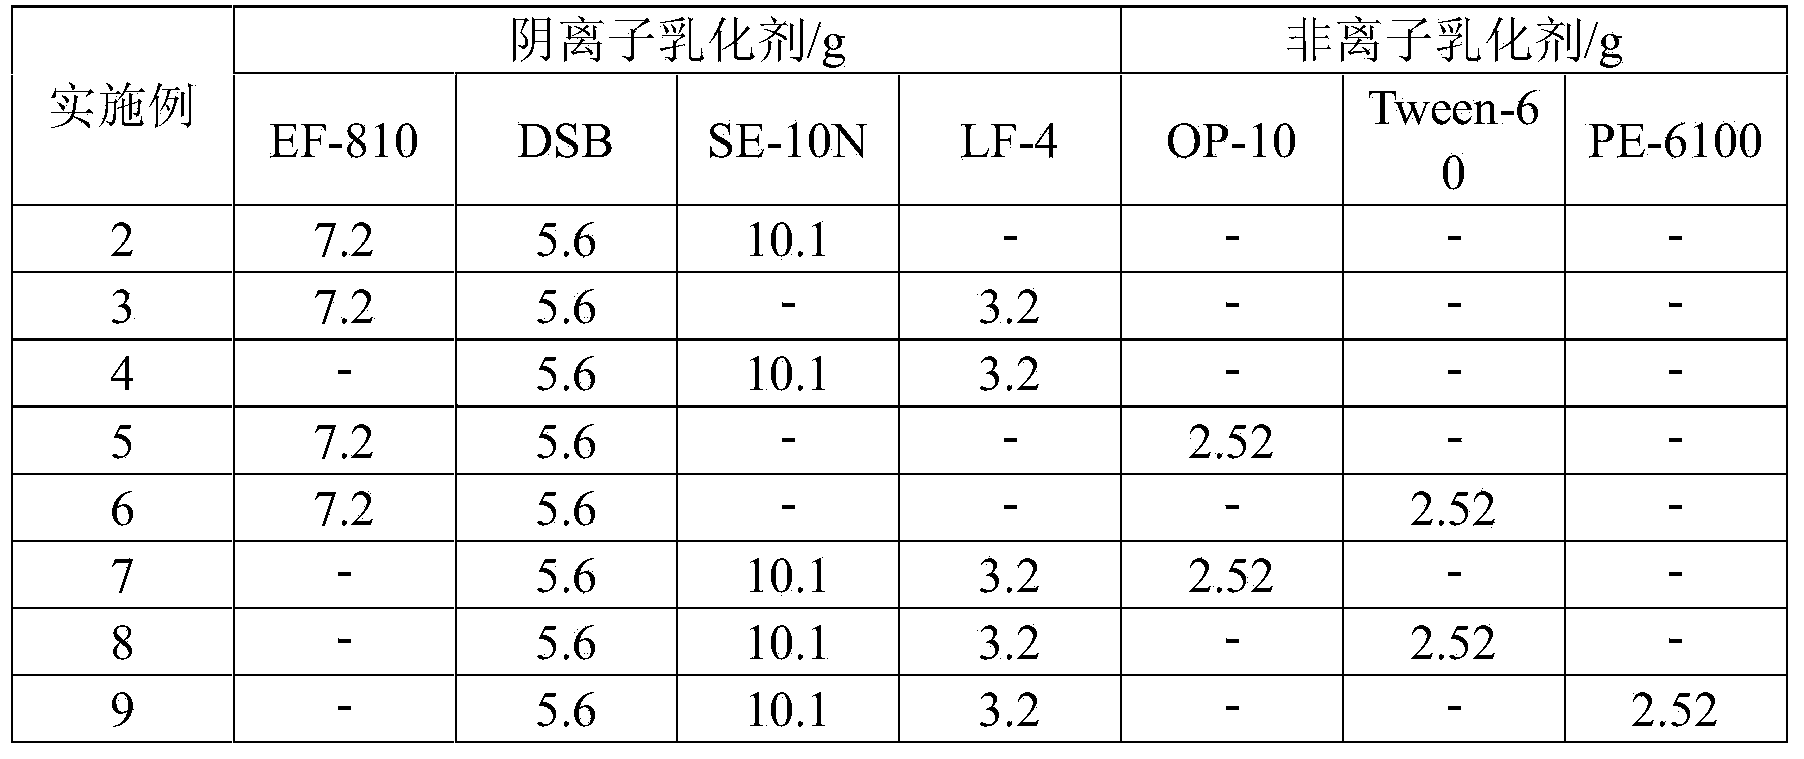 Aqueous coating material with ultralow VOC (Volatile Organic Compound) release and preparation method thereof